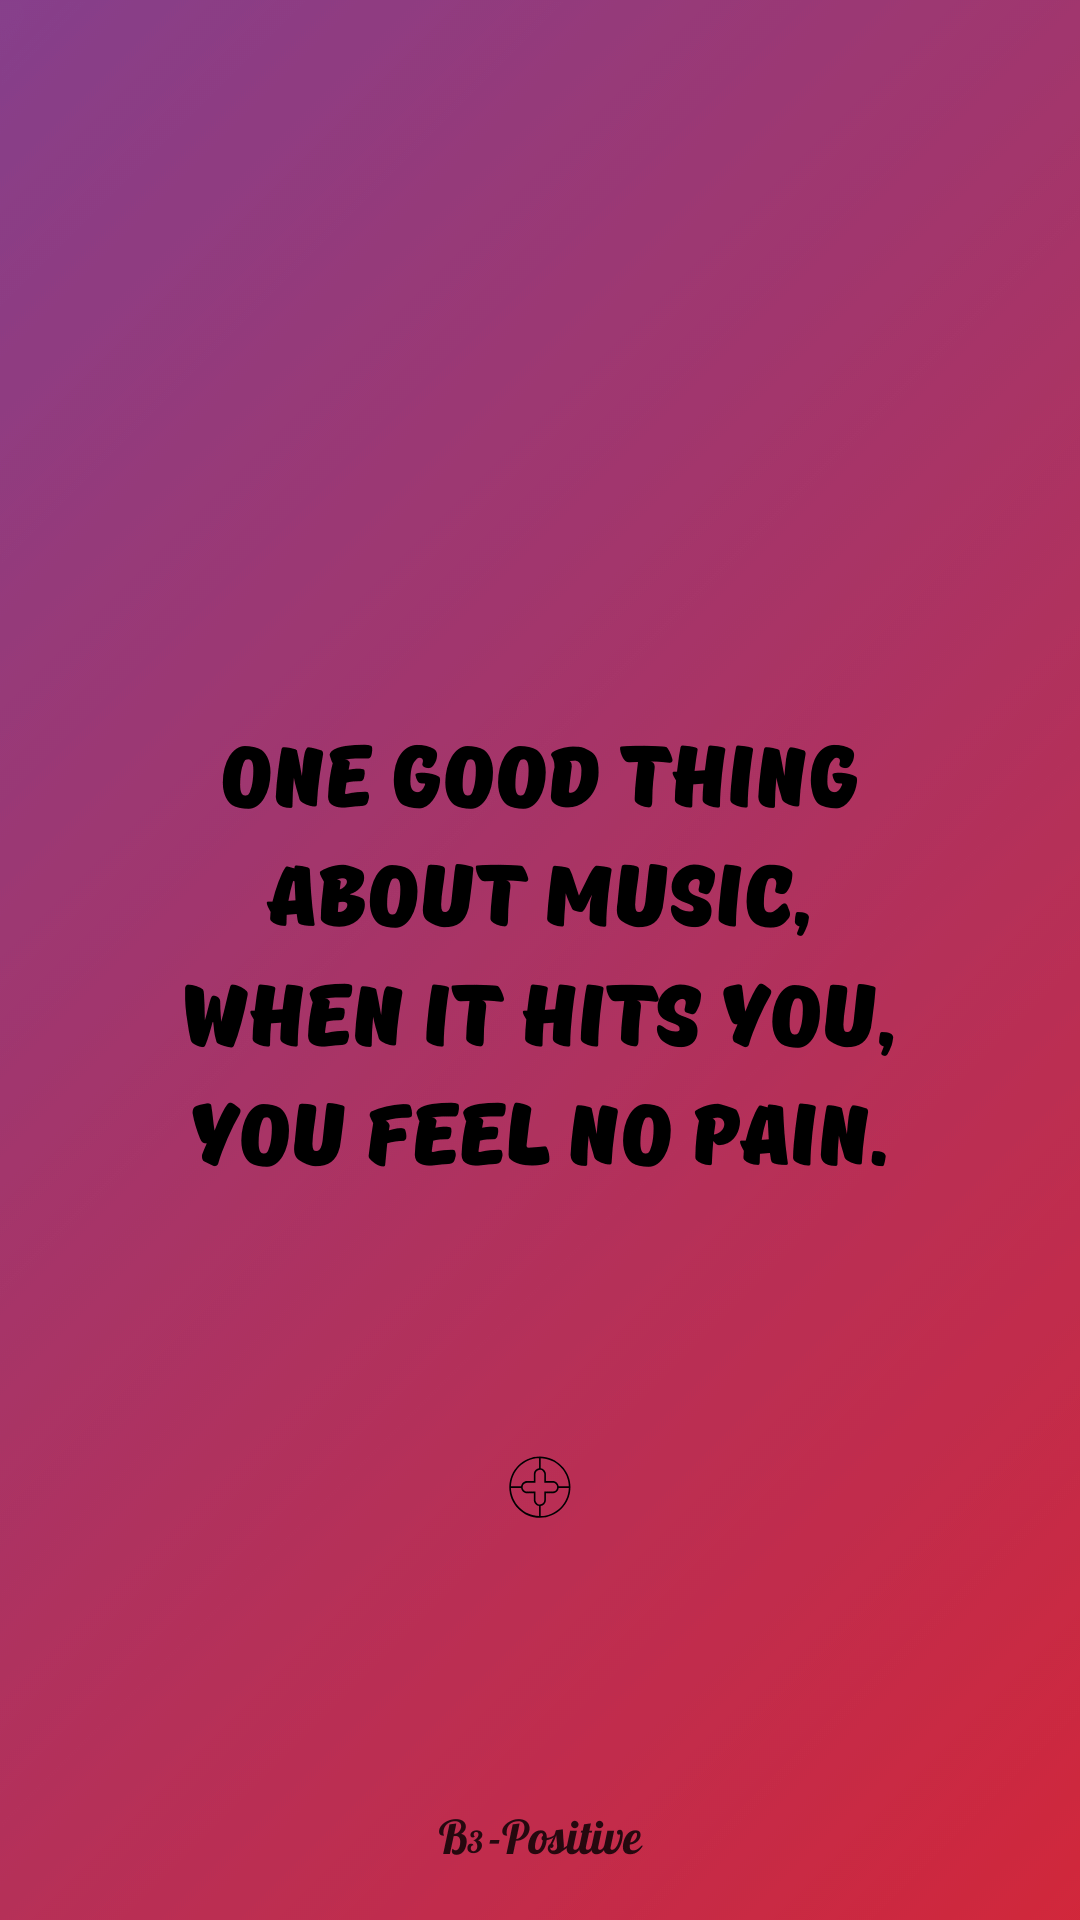 Music Quotes Wallpaper IPhone Android [FREE DOWNLOAD]